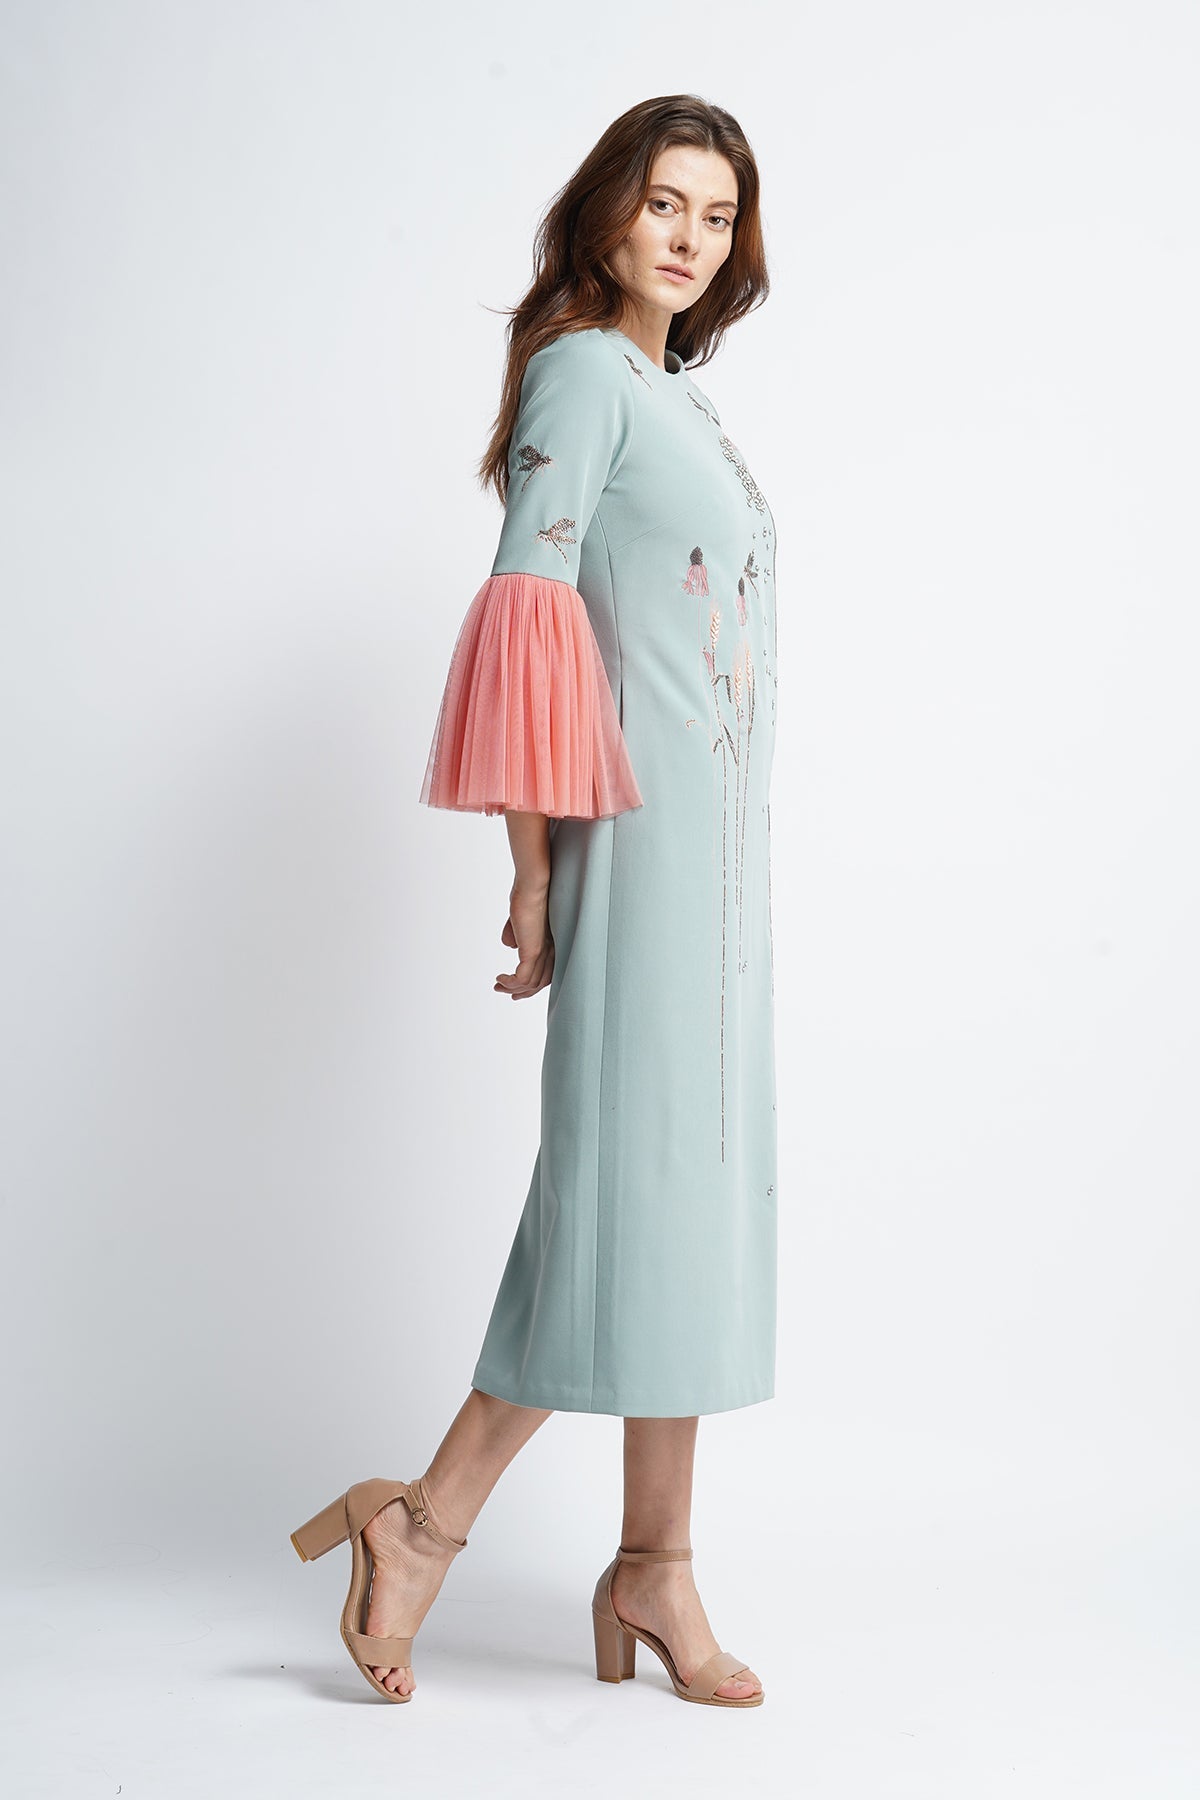 Wildflower And Dragonflies Midi Dress With Frill Sleeves